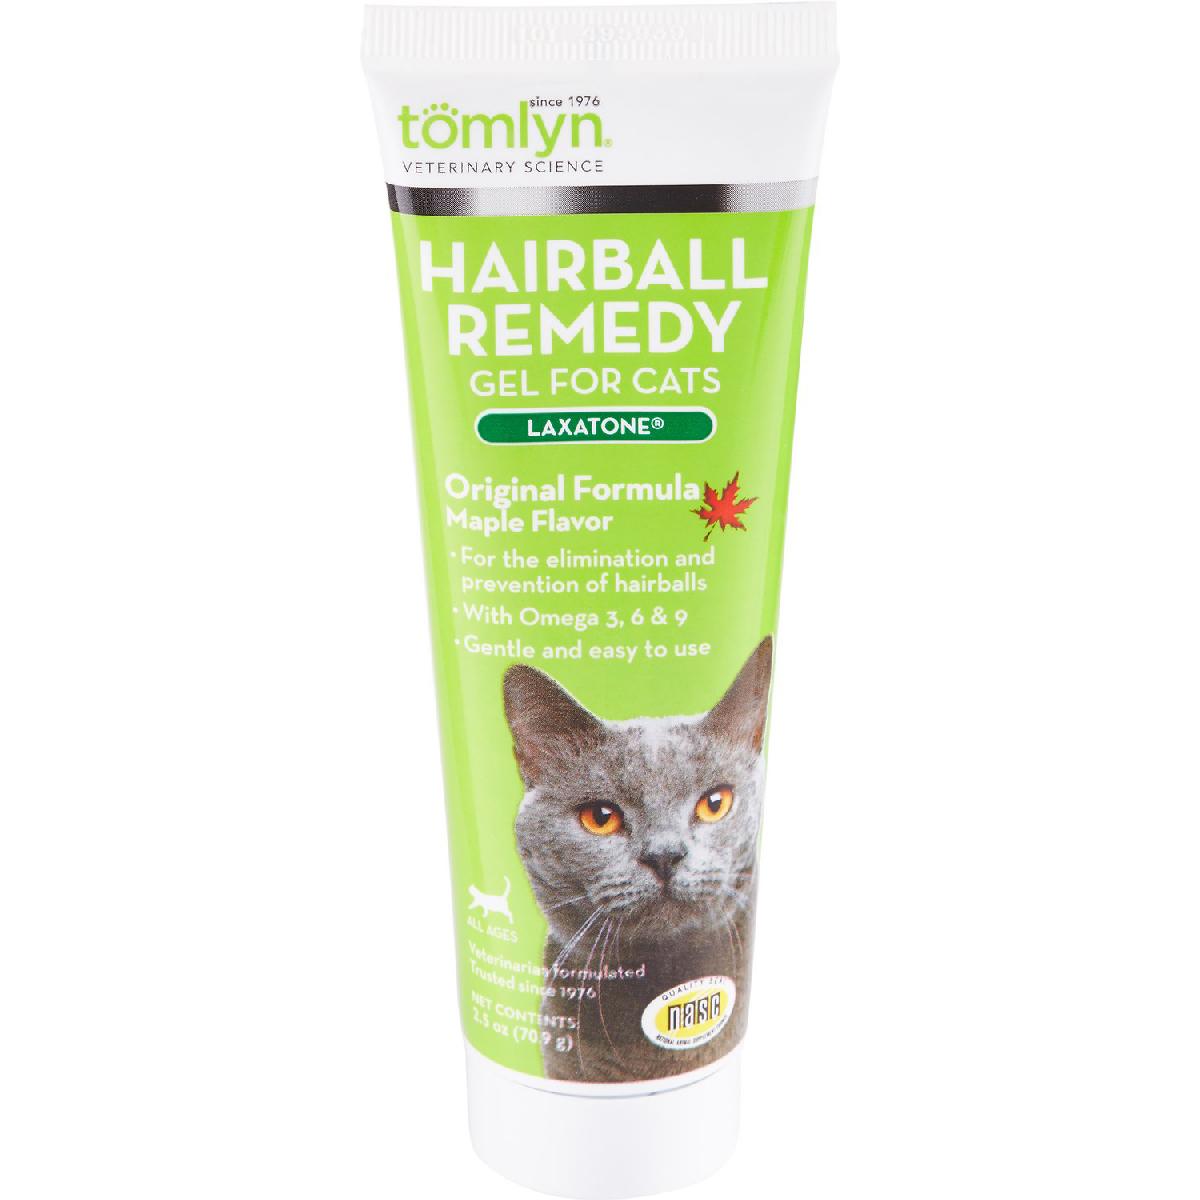 Tomlyn Laxatone Hairball Remedy Gel for Cats, Maple Flavored, 2.5oz